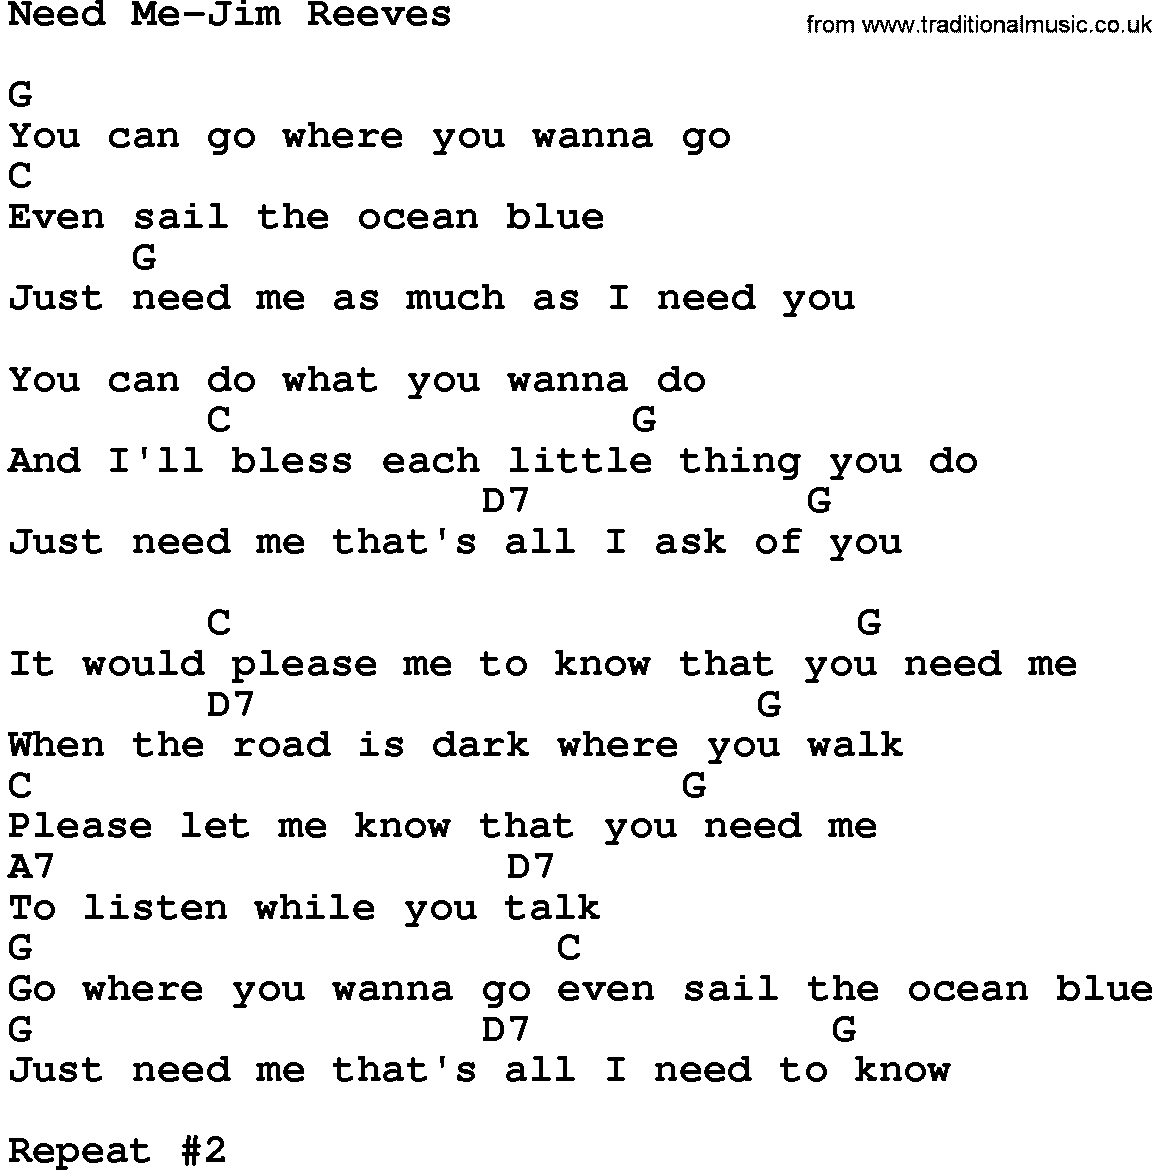 Country music song: Need Me-Jim Reeves lyrics and chords